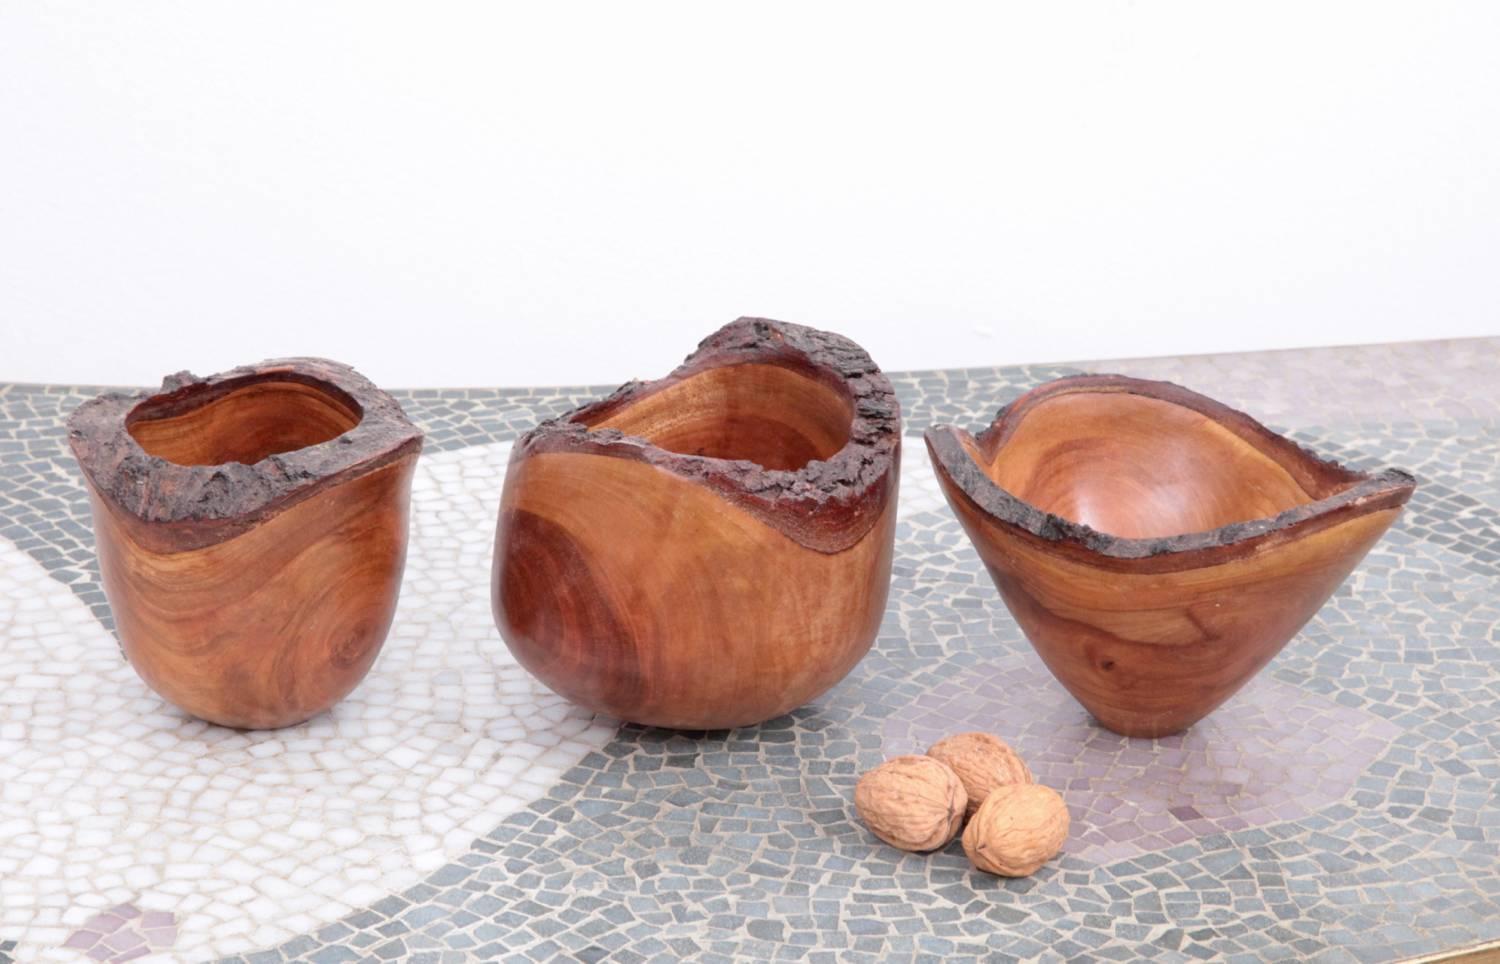 Mid-20th Century Three Turned Wood Bowls by German Craftsmen Eckart Mohlenbeck in Cherry